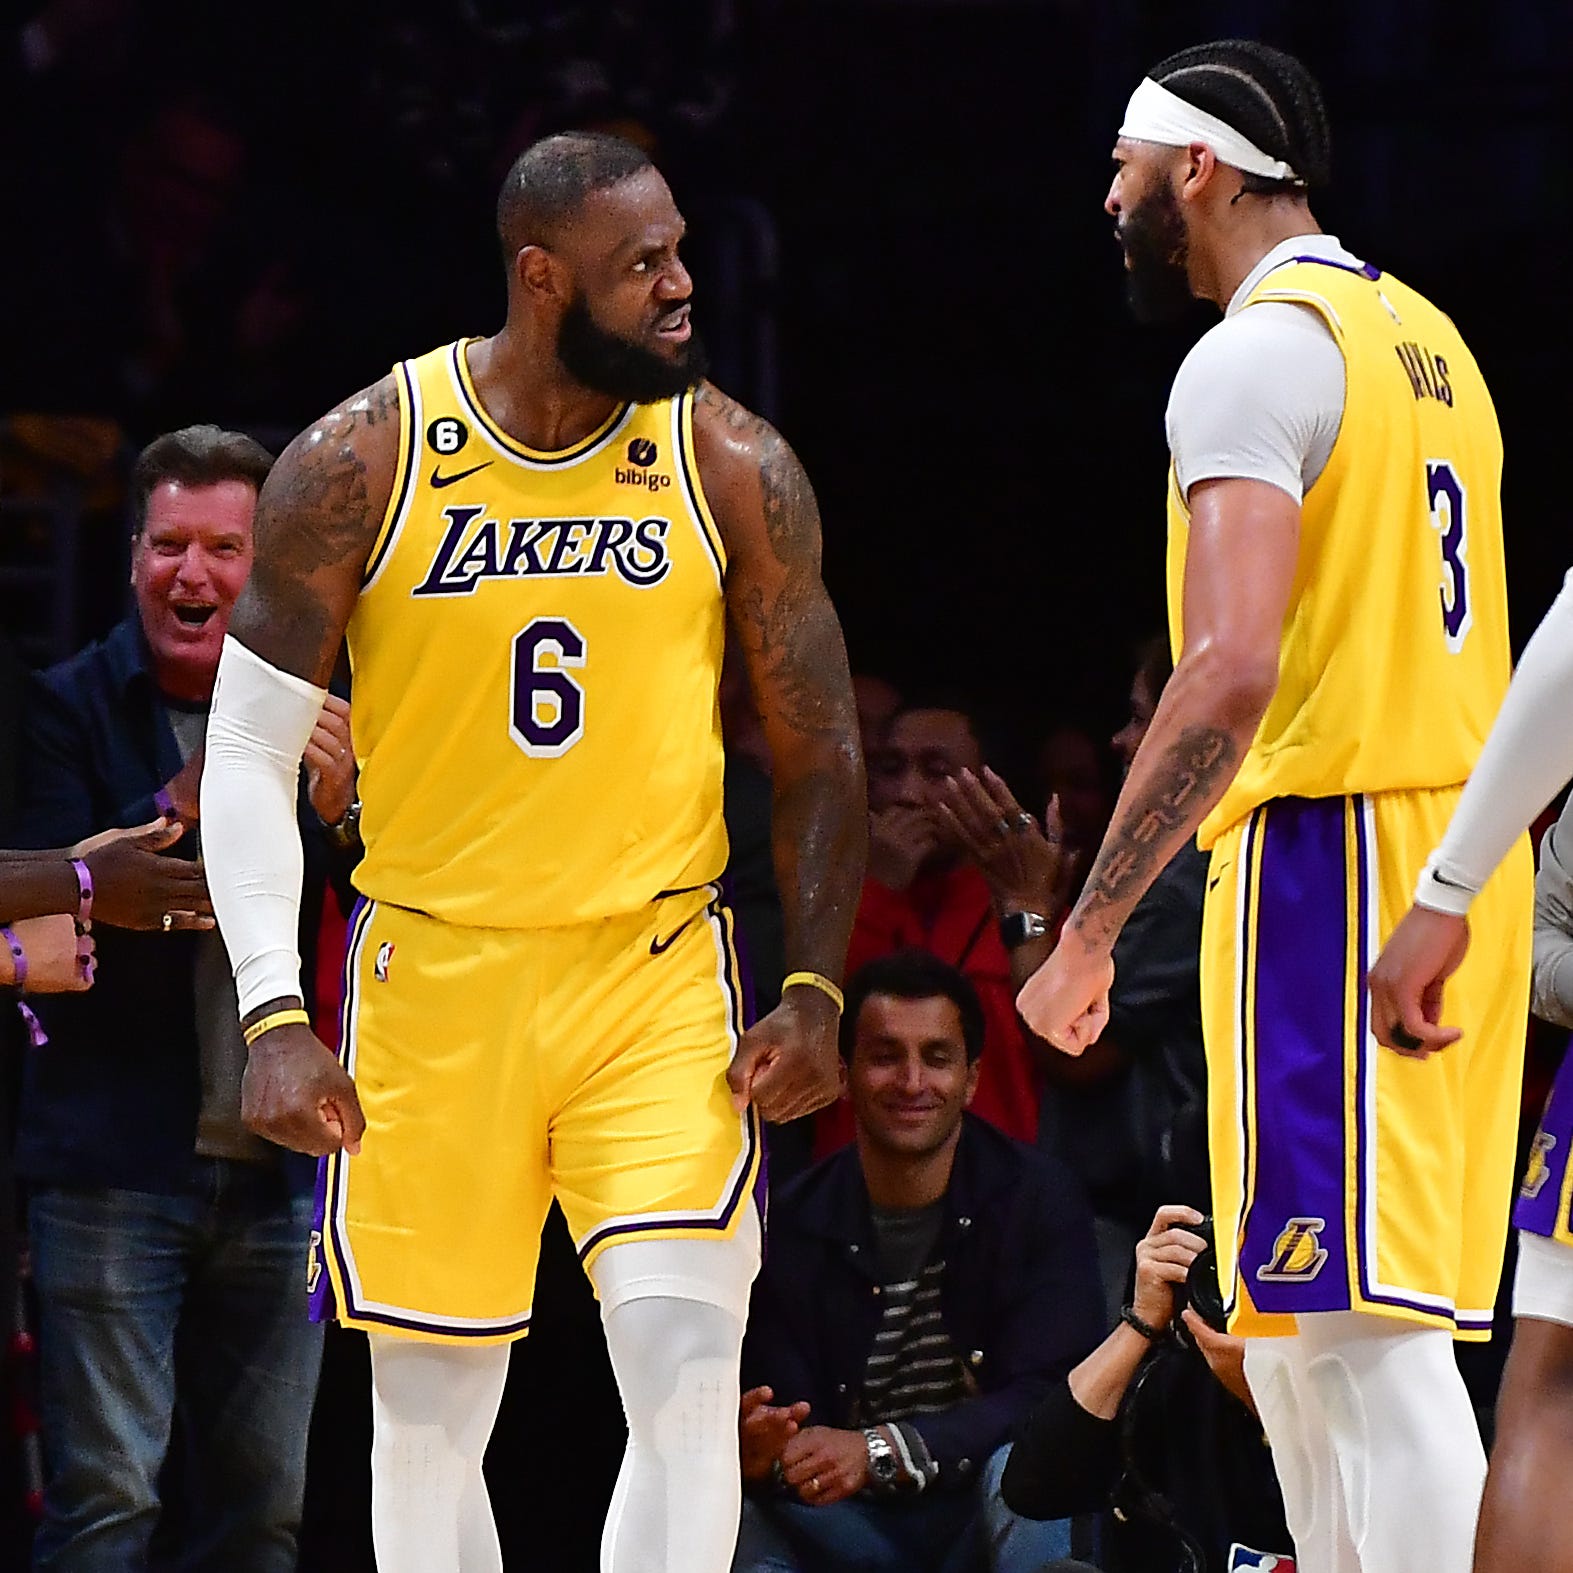 Los Angeles Lakers forward LeBron James reacts after making a basket in overtime.